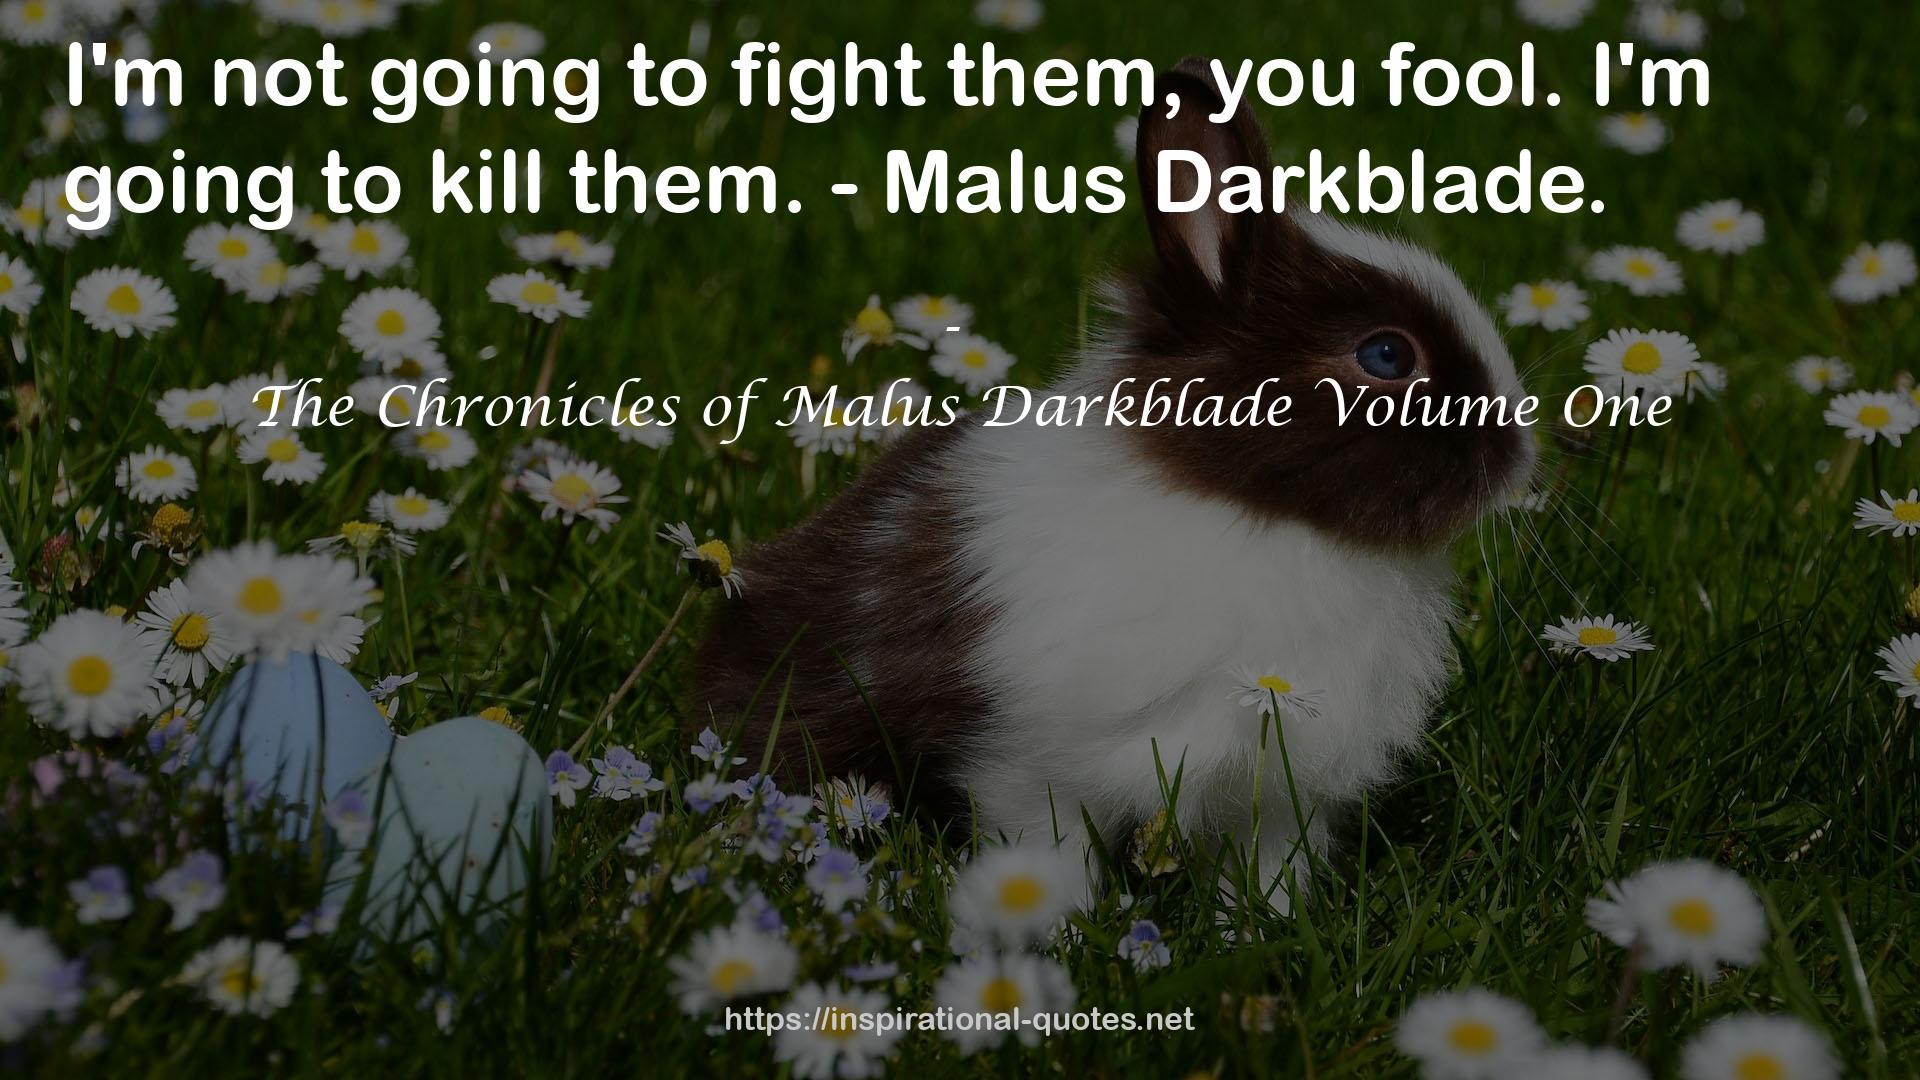 The Chronicles of Malus Darkblade Volume One QUOTES